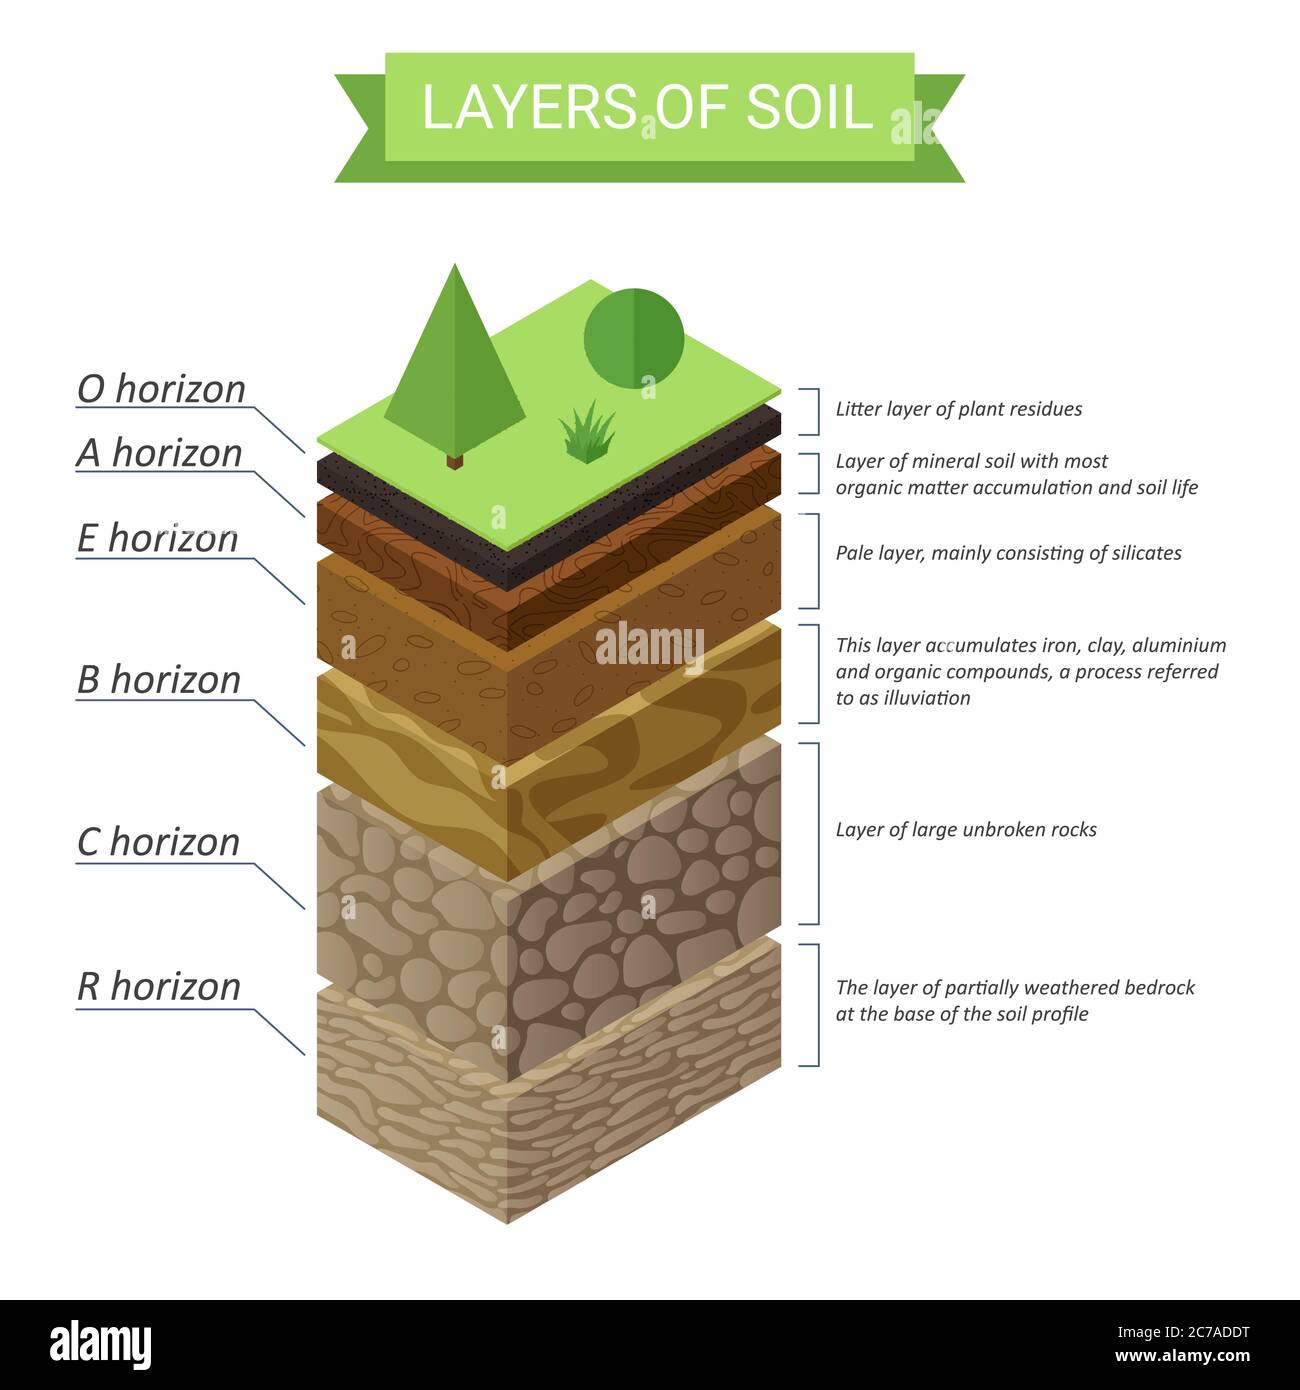 soil layers project